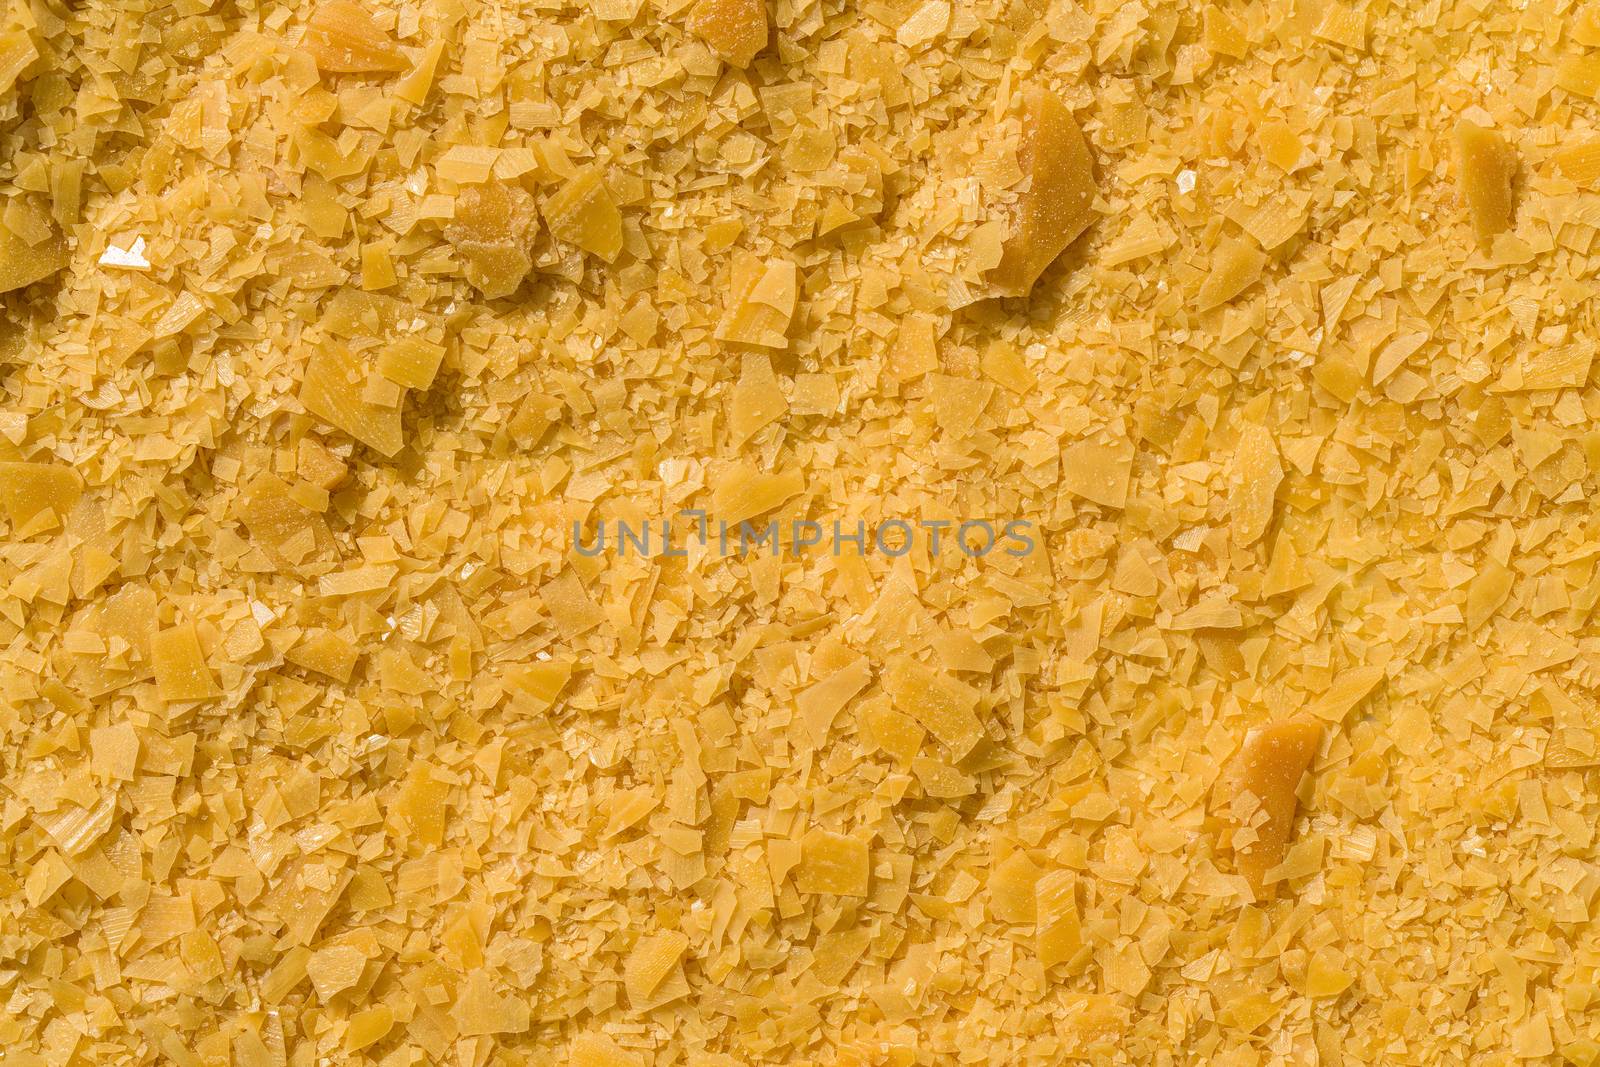 Organic Carnauba Wax come in the form of hard yellow flakes and is widely used in cosmetics by chadchai_k